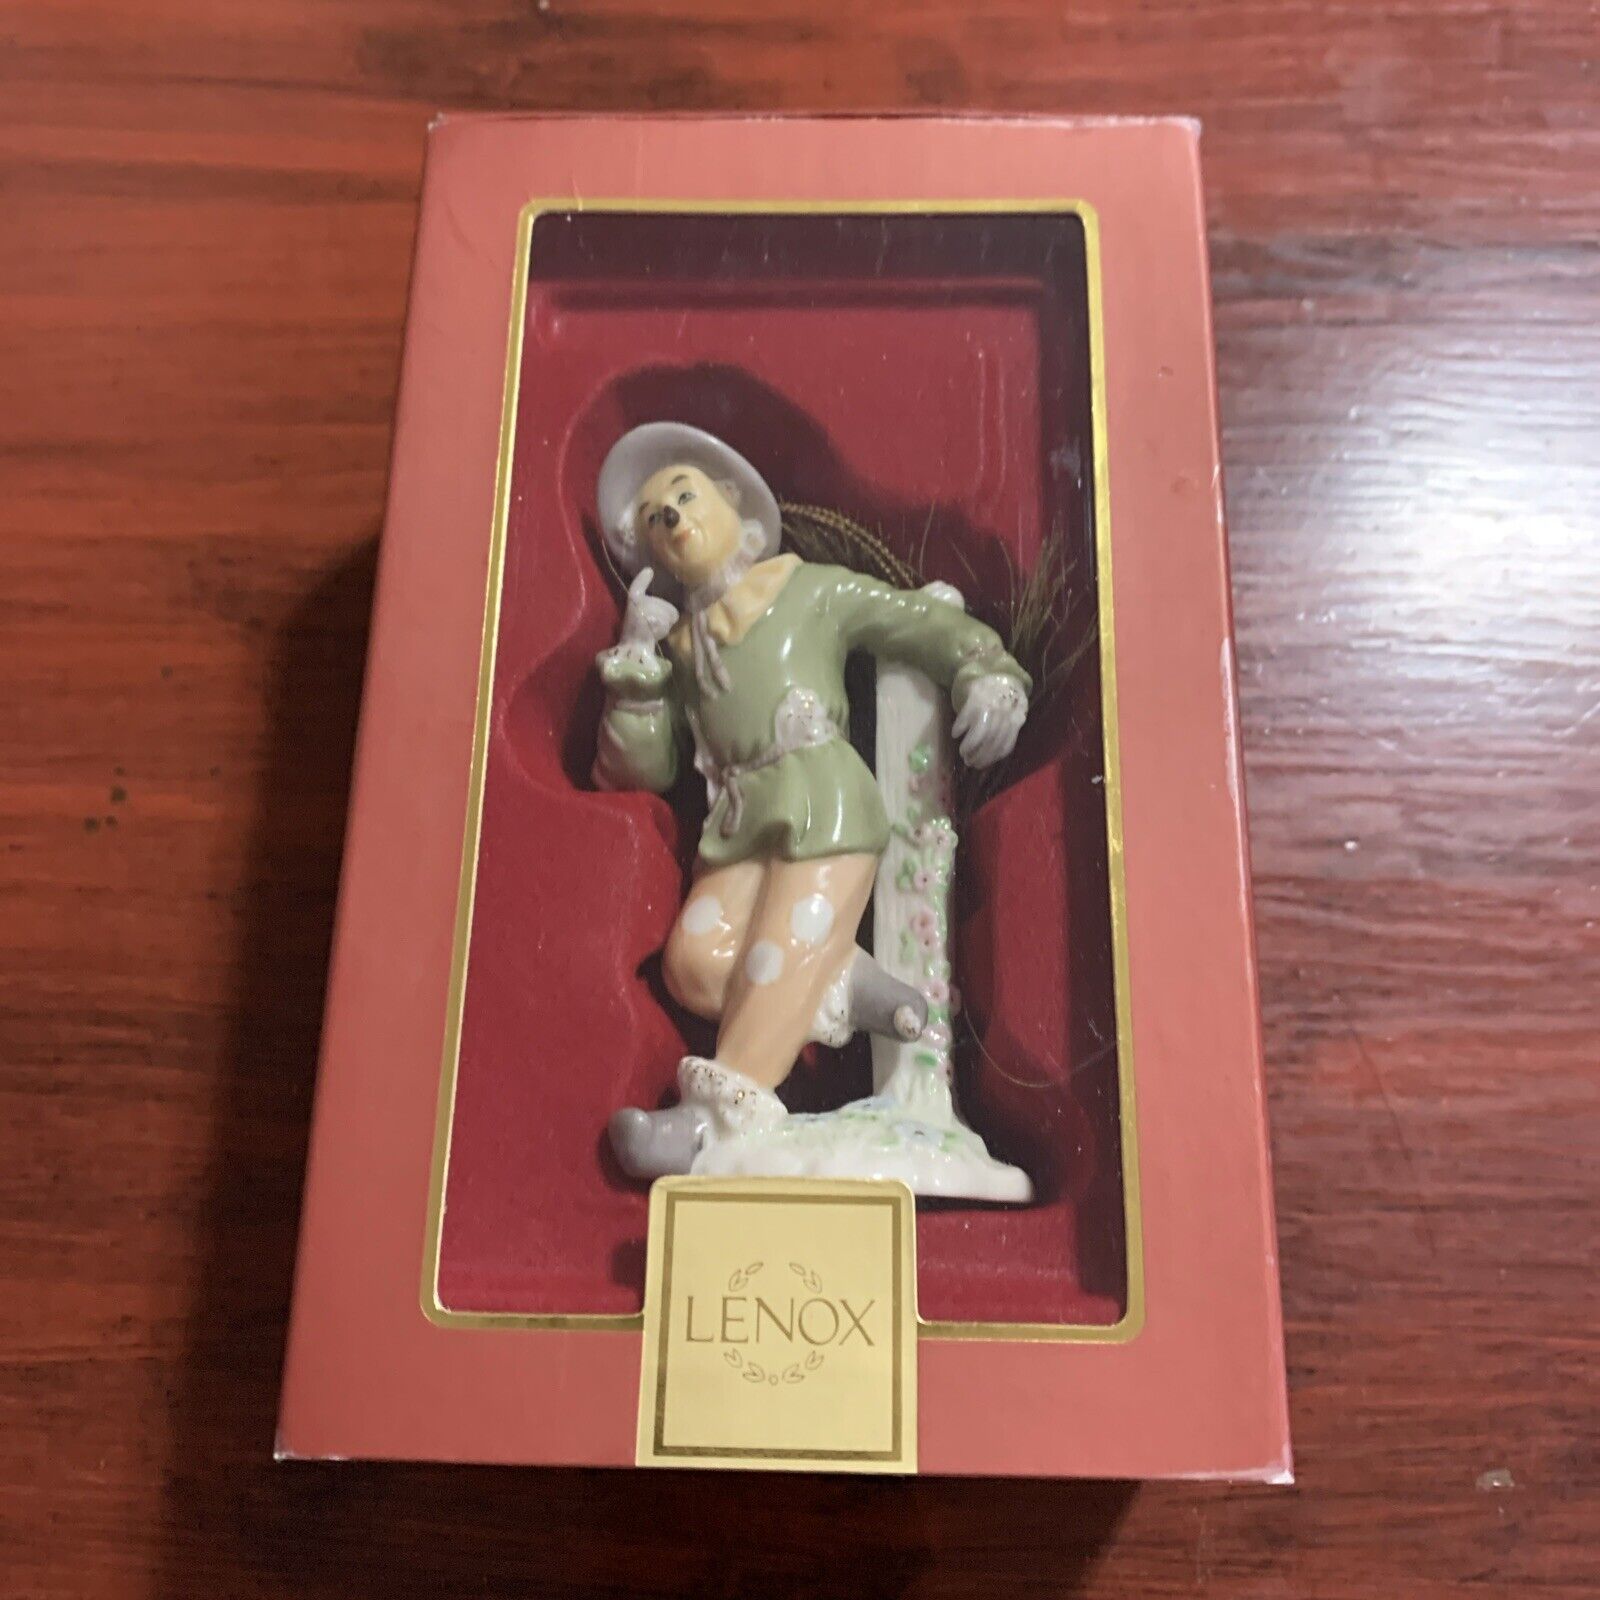 The Scarecrow Lenox Wizard Of Oz Porcelain Ornament #783011 With Box